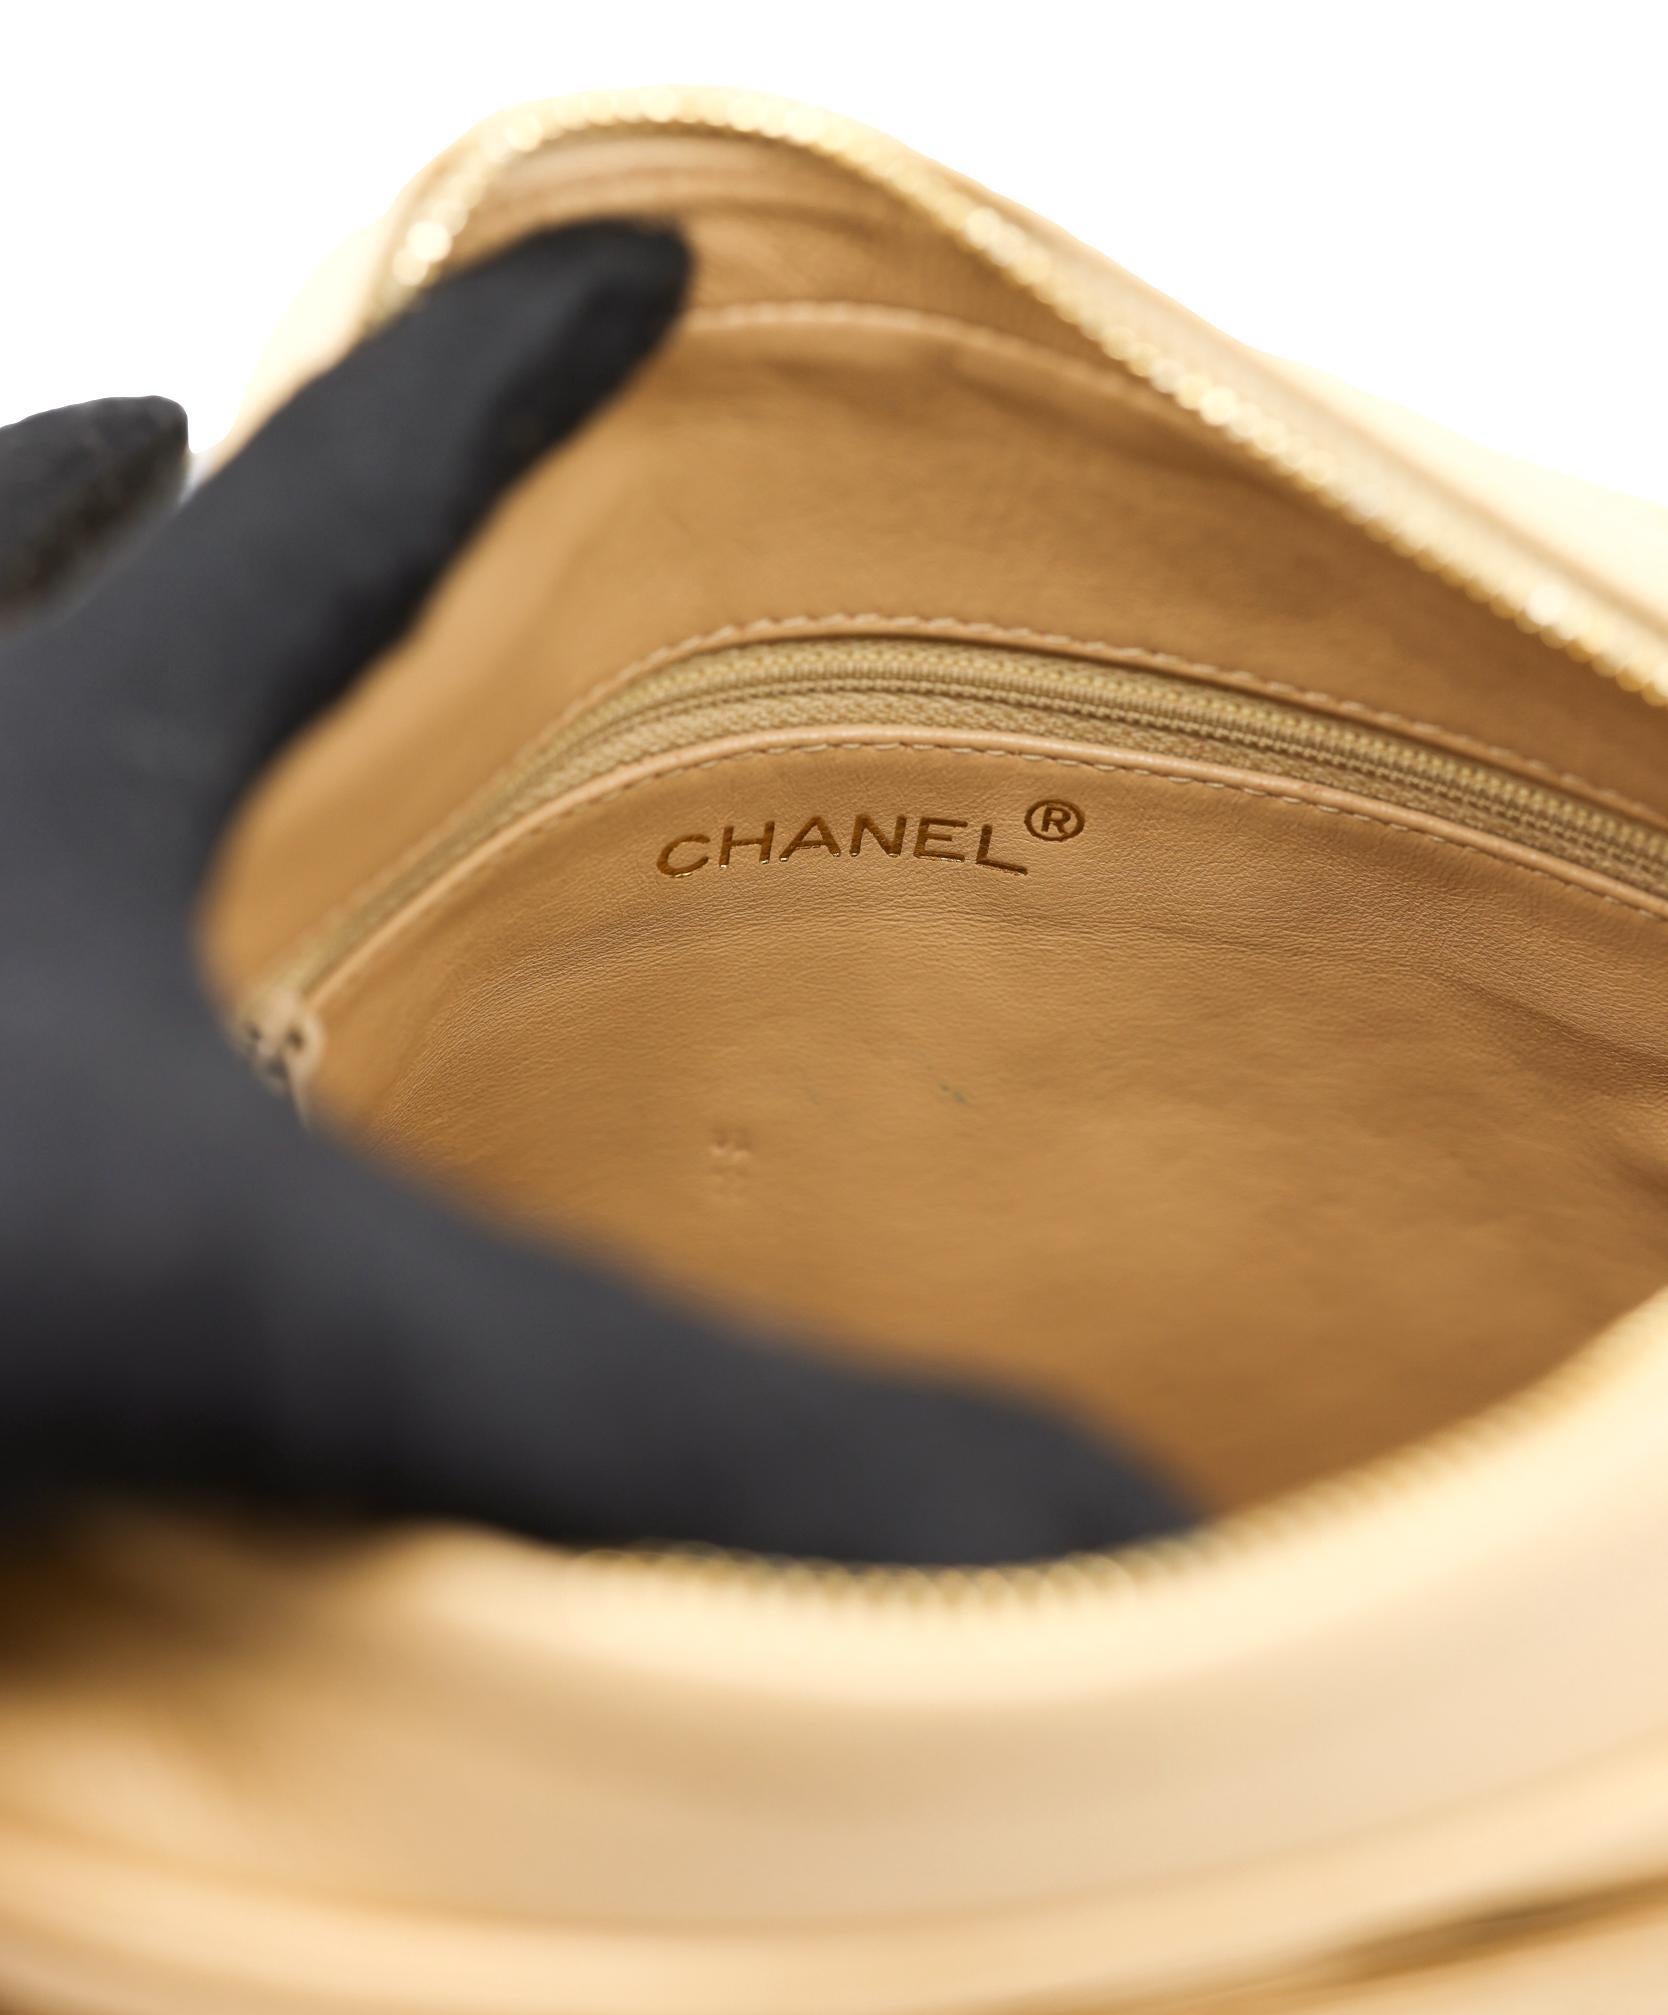 Chanel Vintage Quilted Caviar Leather Camera Bag with Gold Hardware, 1996 - 1997. 9